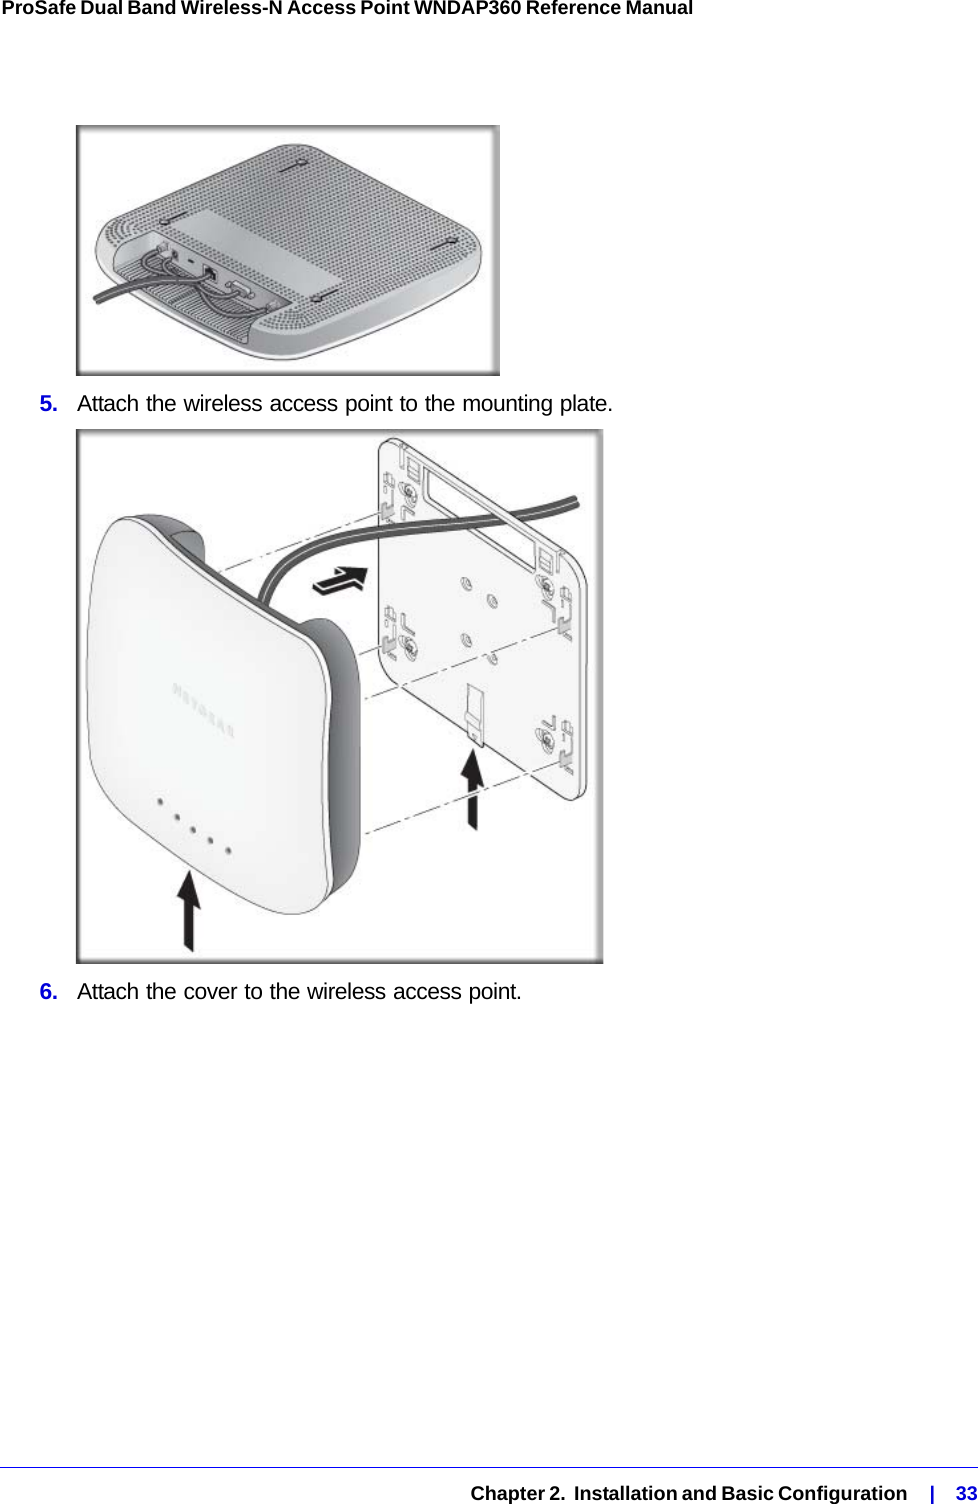   Chapter 2.  Installation and Basic Configuration    |    33ProSafe Dual Band Wireless-N Access Point WNDAP360 Reference Manual 5.  Attach the wireless access point to the mounting plate.6.  Attach the cover to the wireless access point.